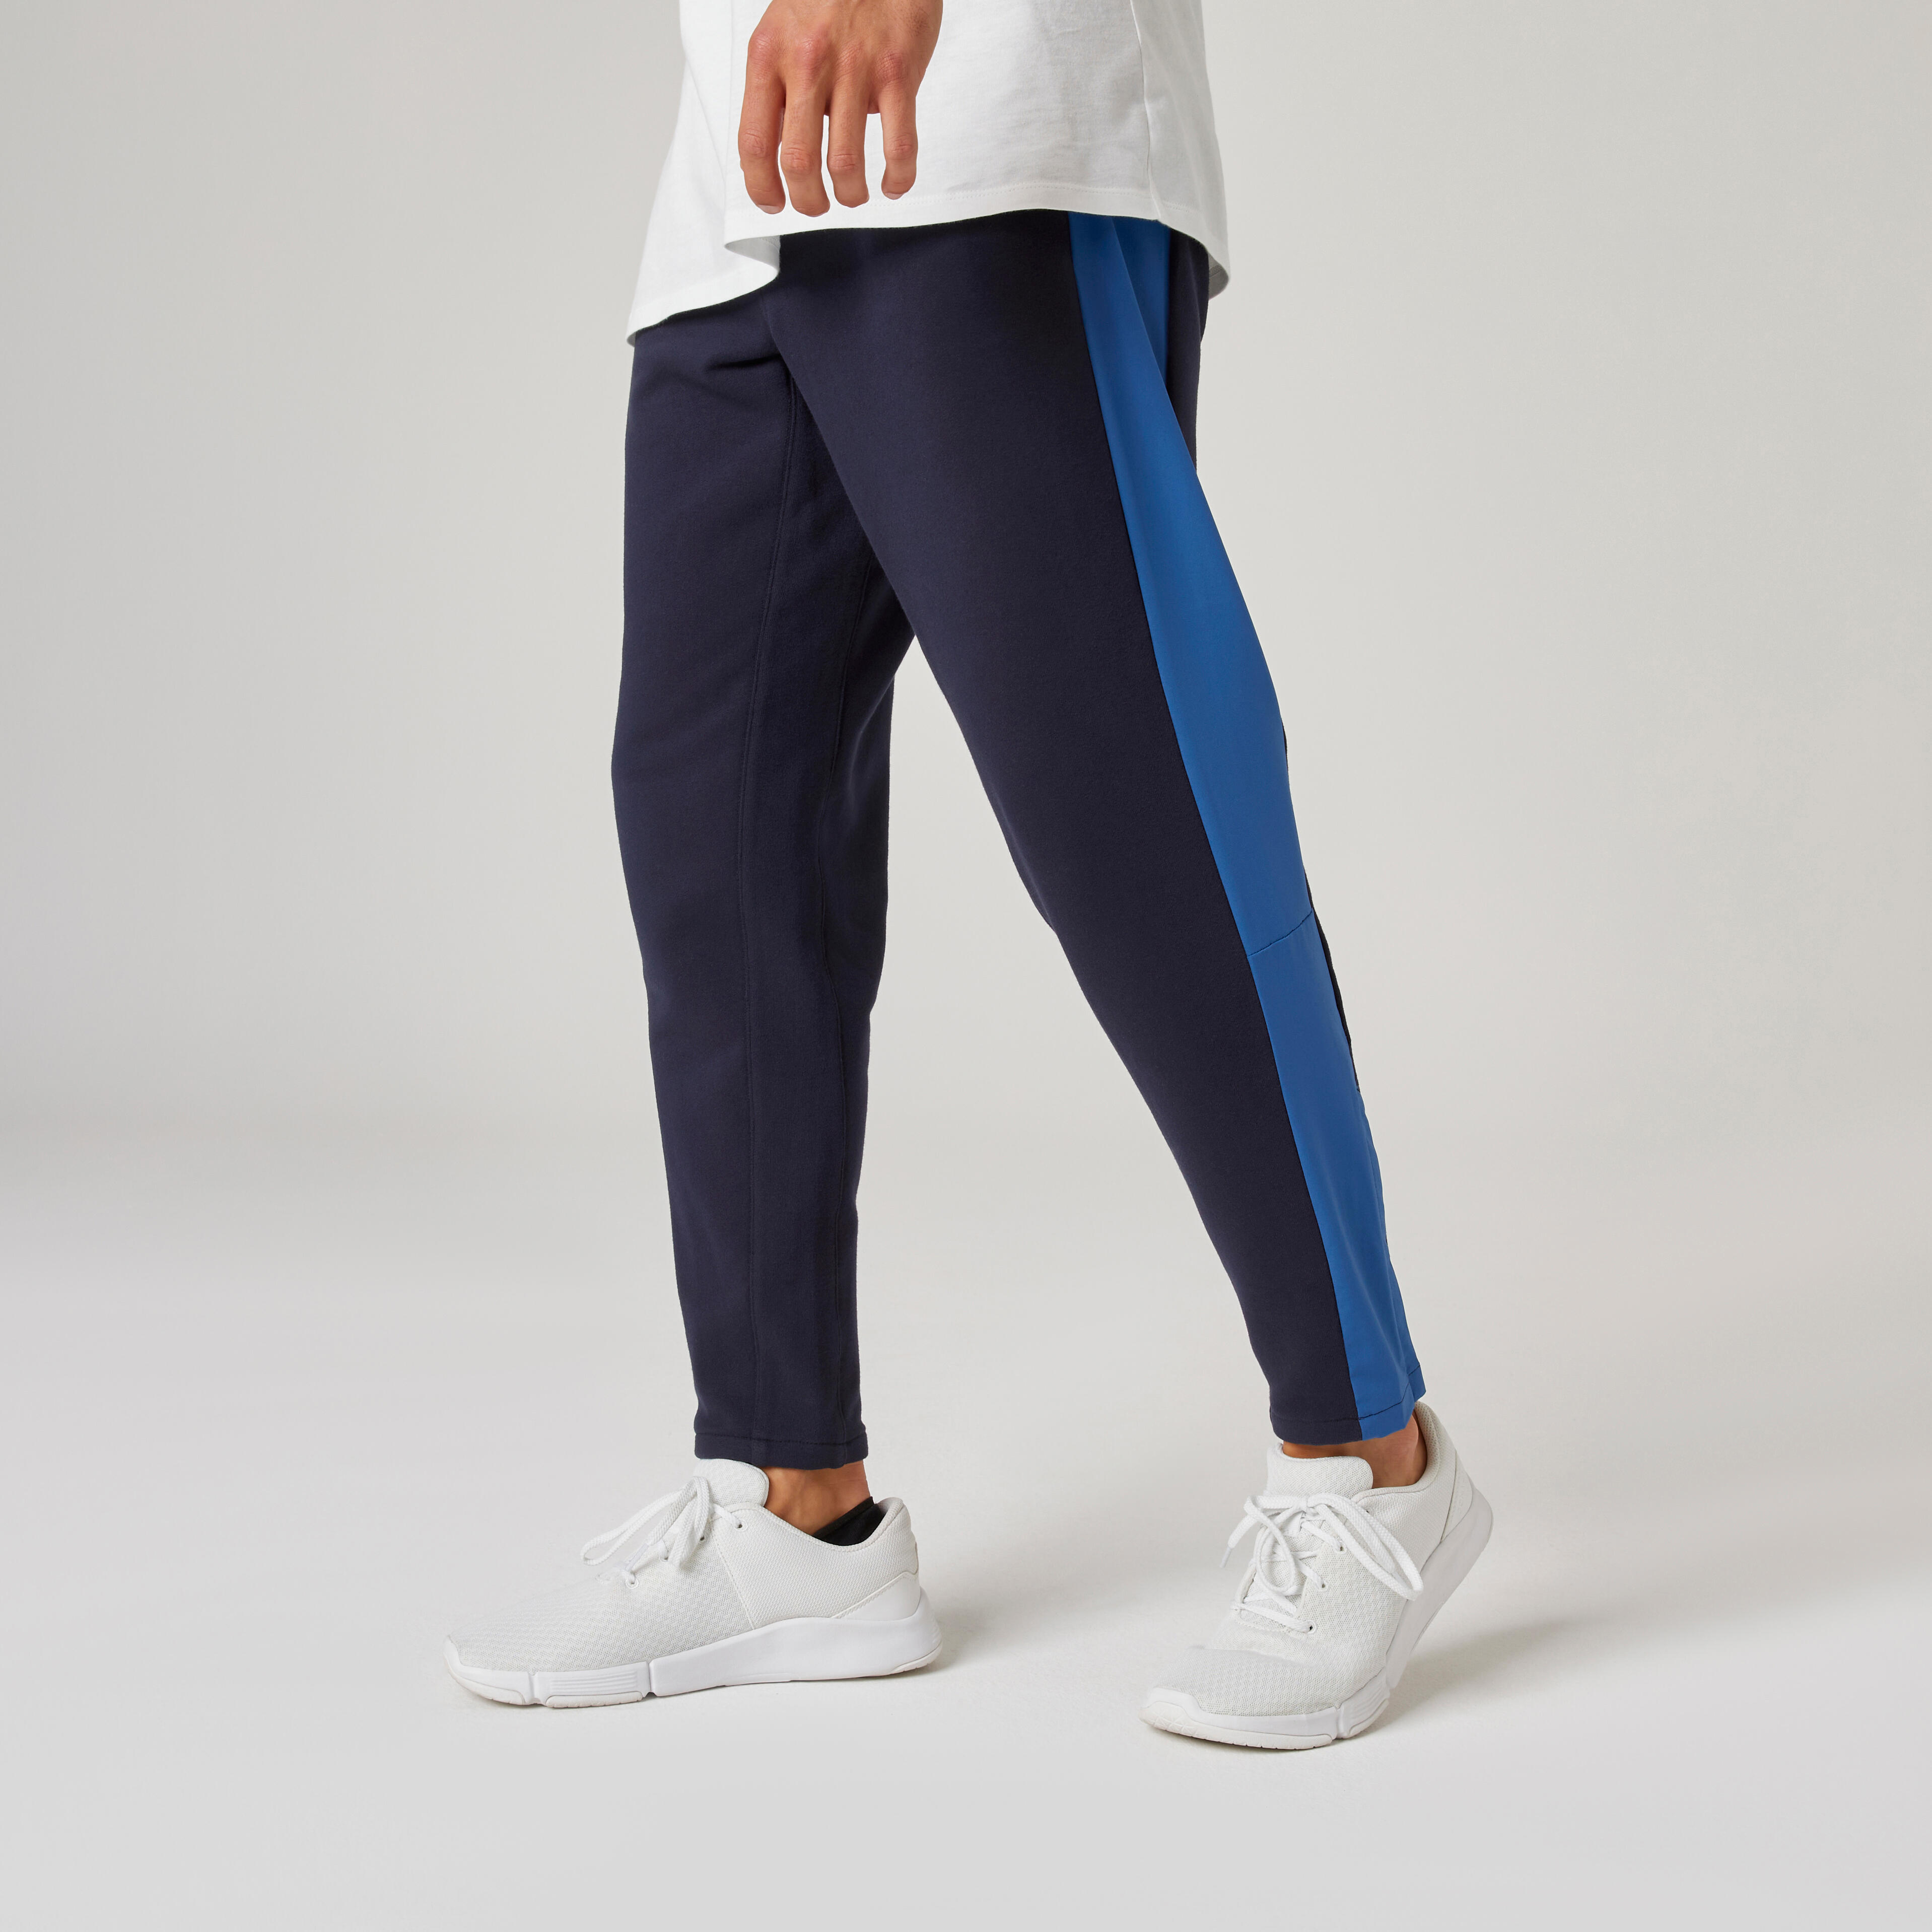 Top 15 Best Mens Track Pants Under 500 Rupees in India 2021